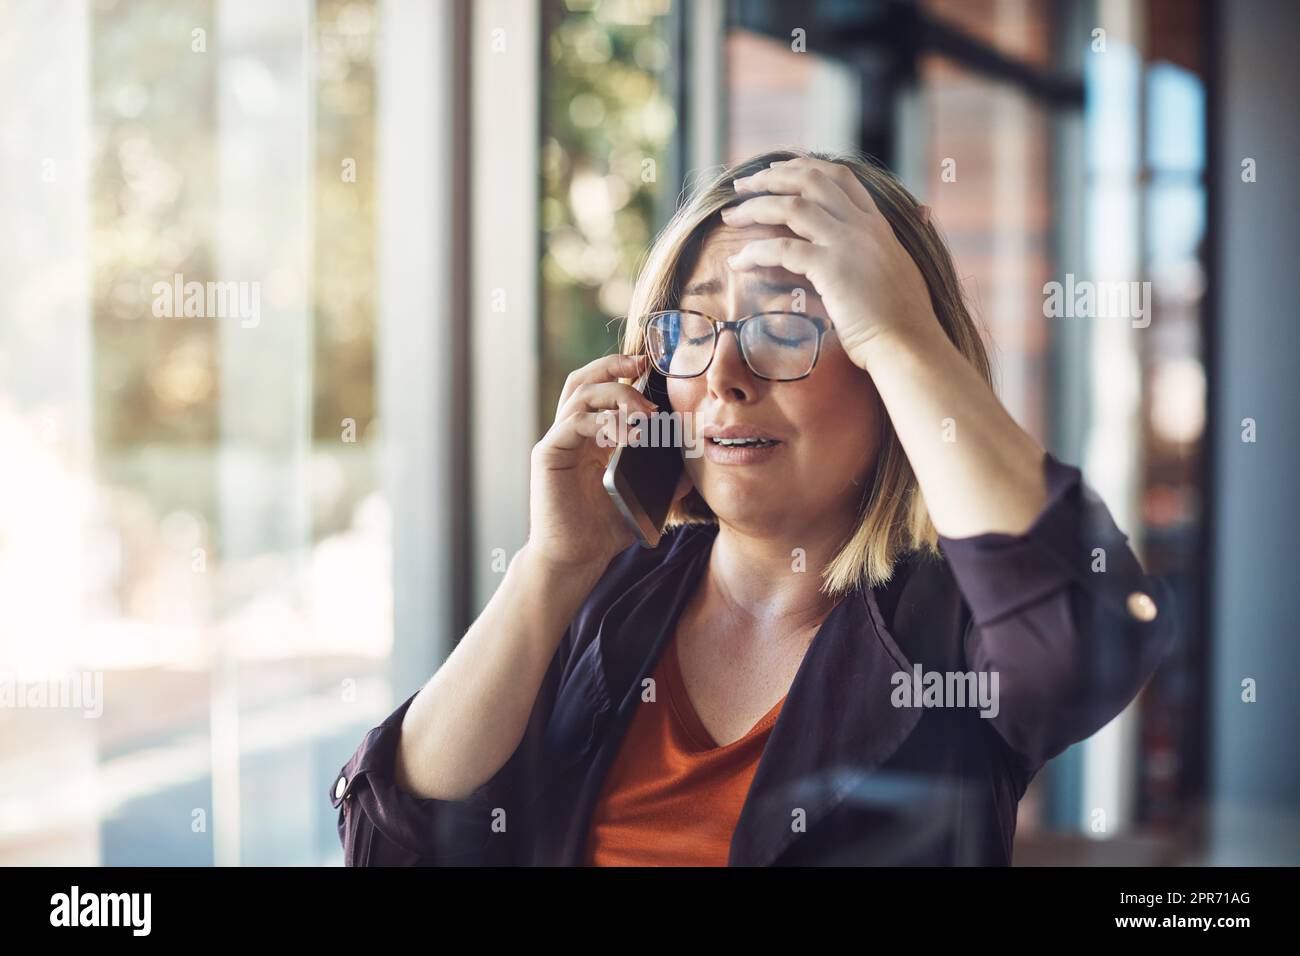 Say it isnt so. Shot of a young woman looking distraught while talking on a mobile phone in a modern office. Stock Photo